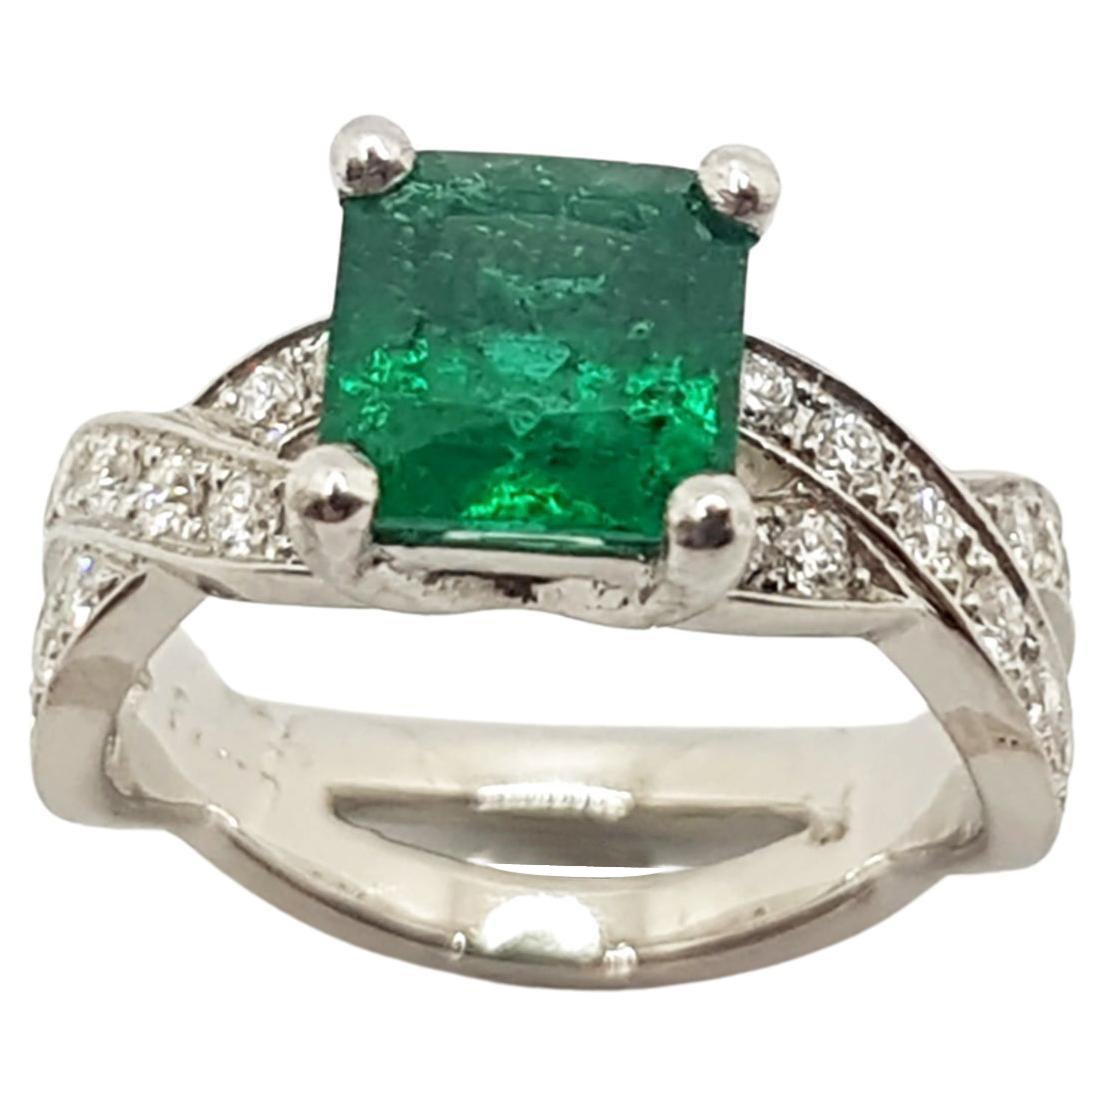 Emerald with Diamond Ring Set in Platinum 950 Settings